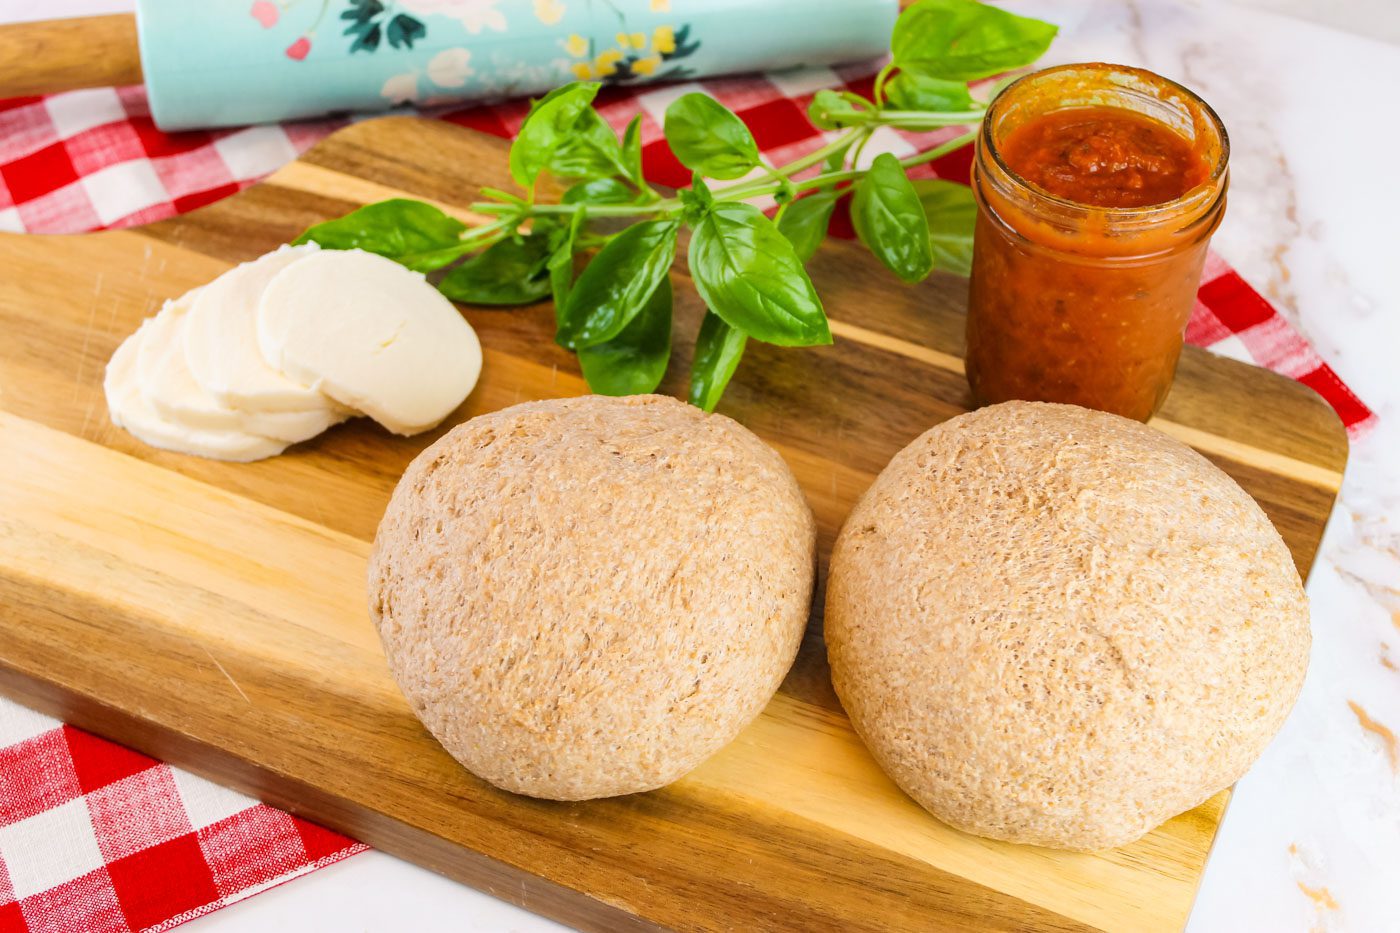 two balls of dough sitting on a wooden cutting board. Board has slices of mozzarella cheese, fresh basil and a jar of pizza sauce.